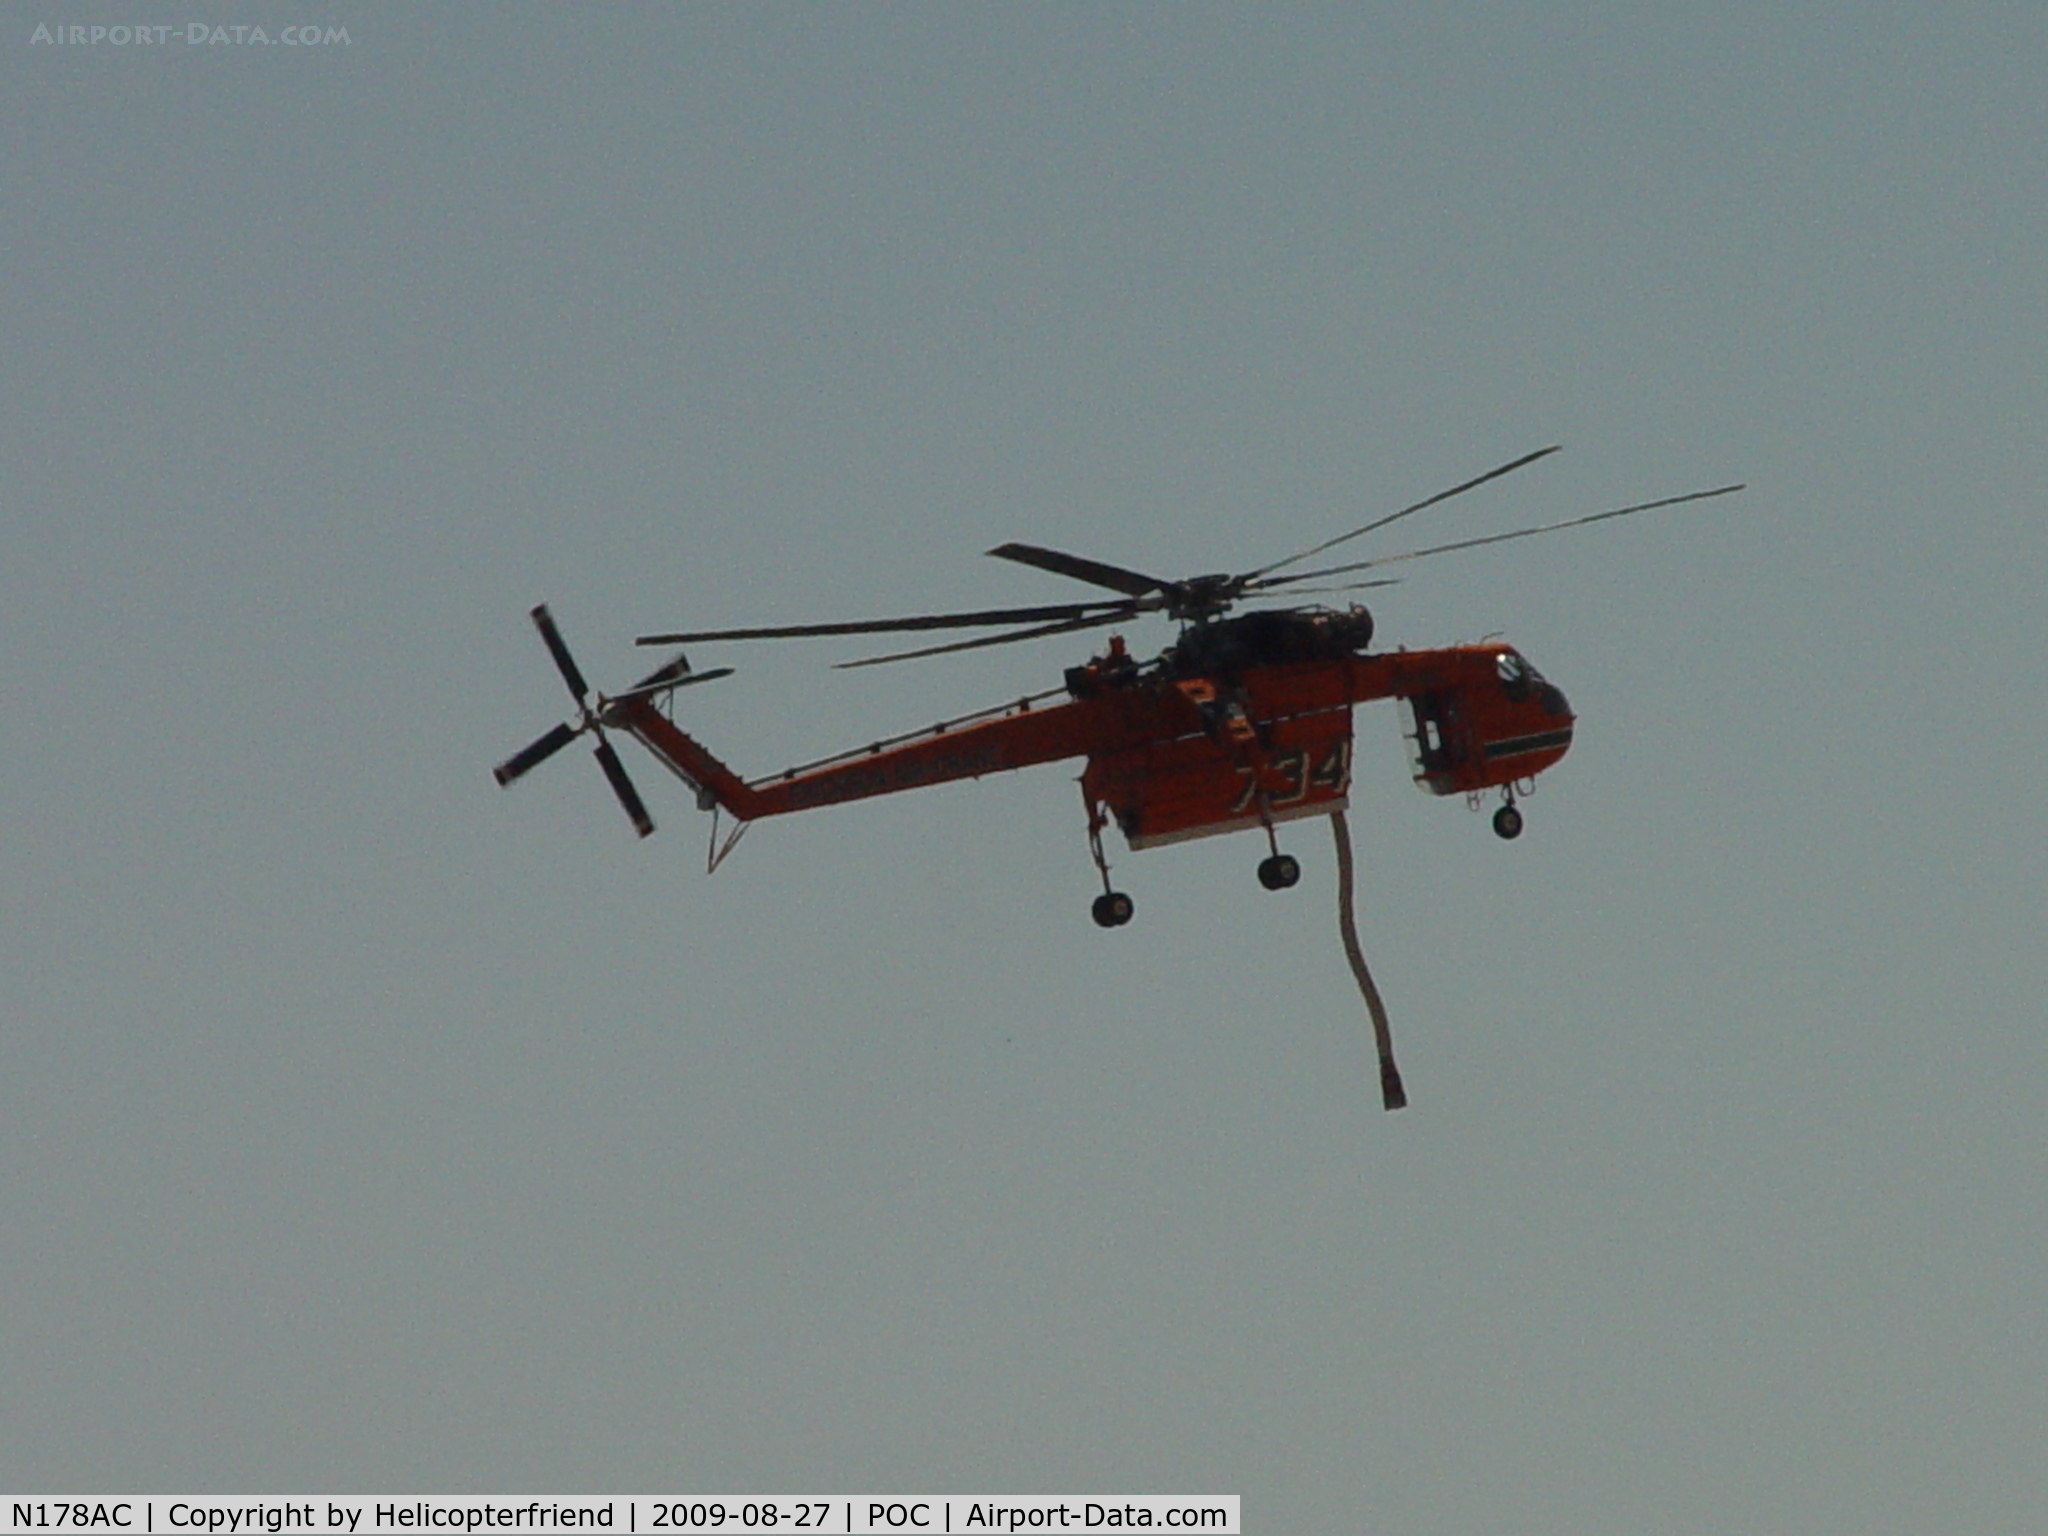 N178AC, 1970 Sikorsky S-64F Skycrane C/N 64097, Returning to Brackett for fuel and rest